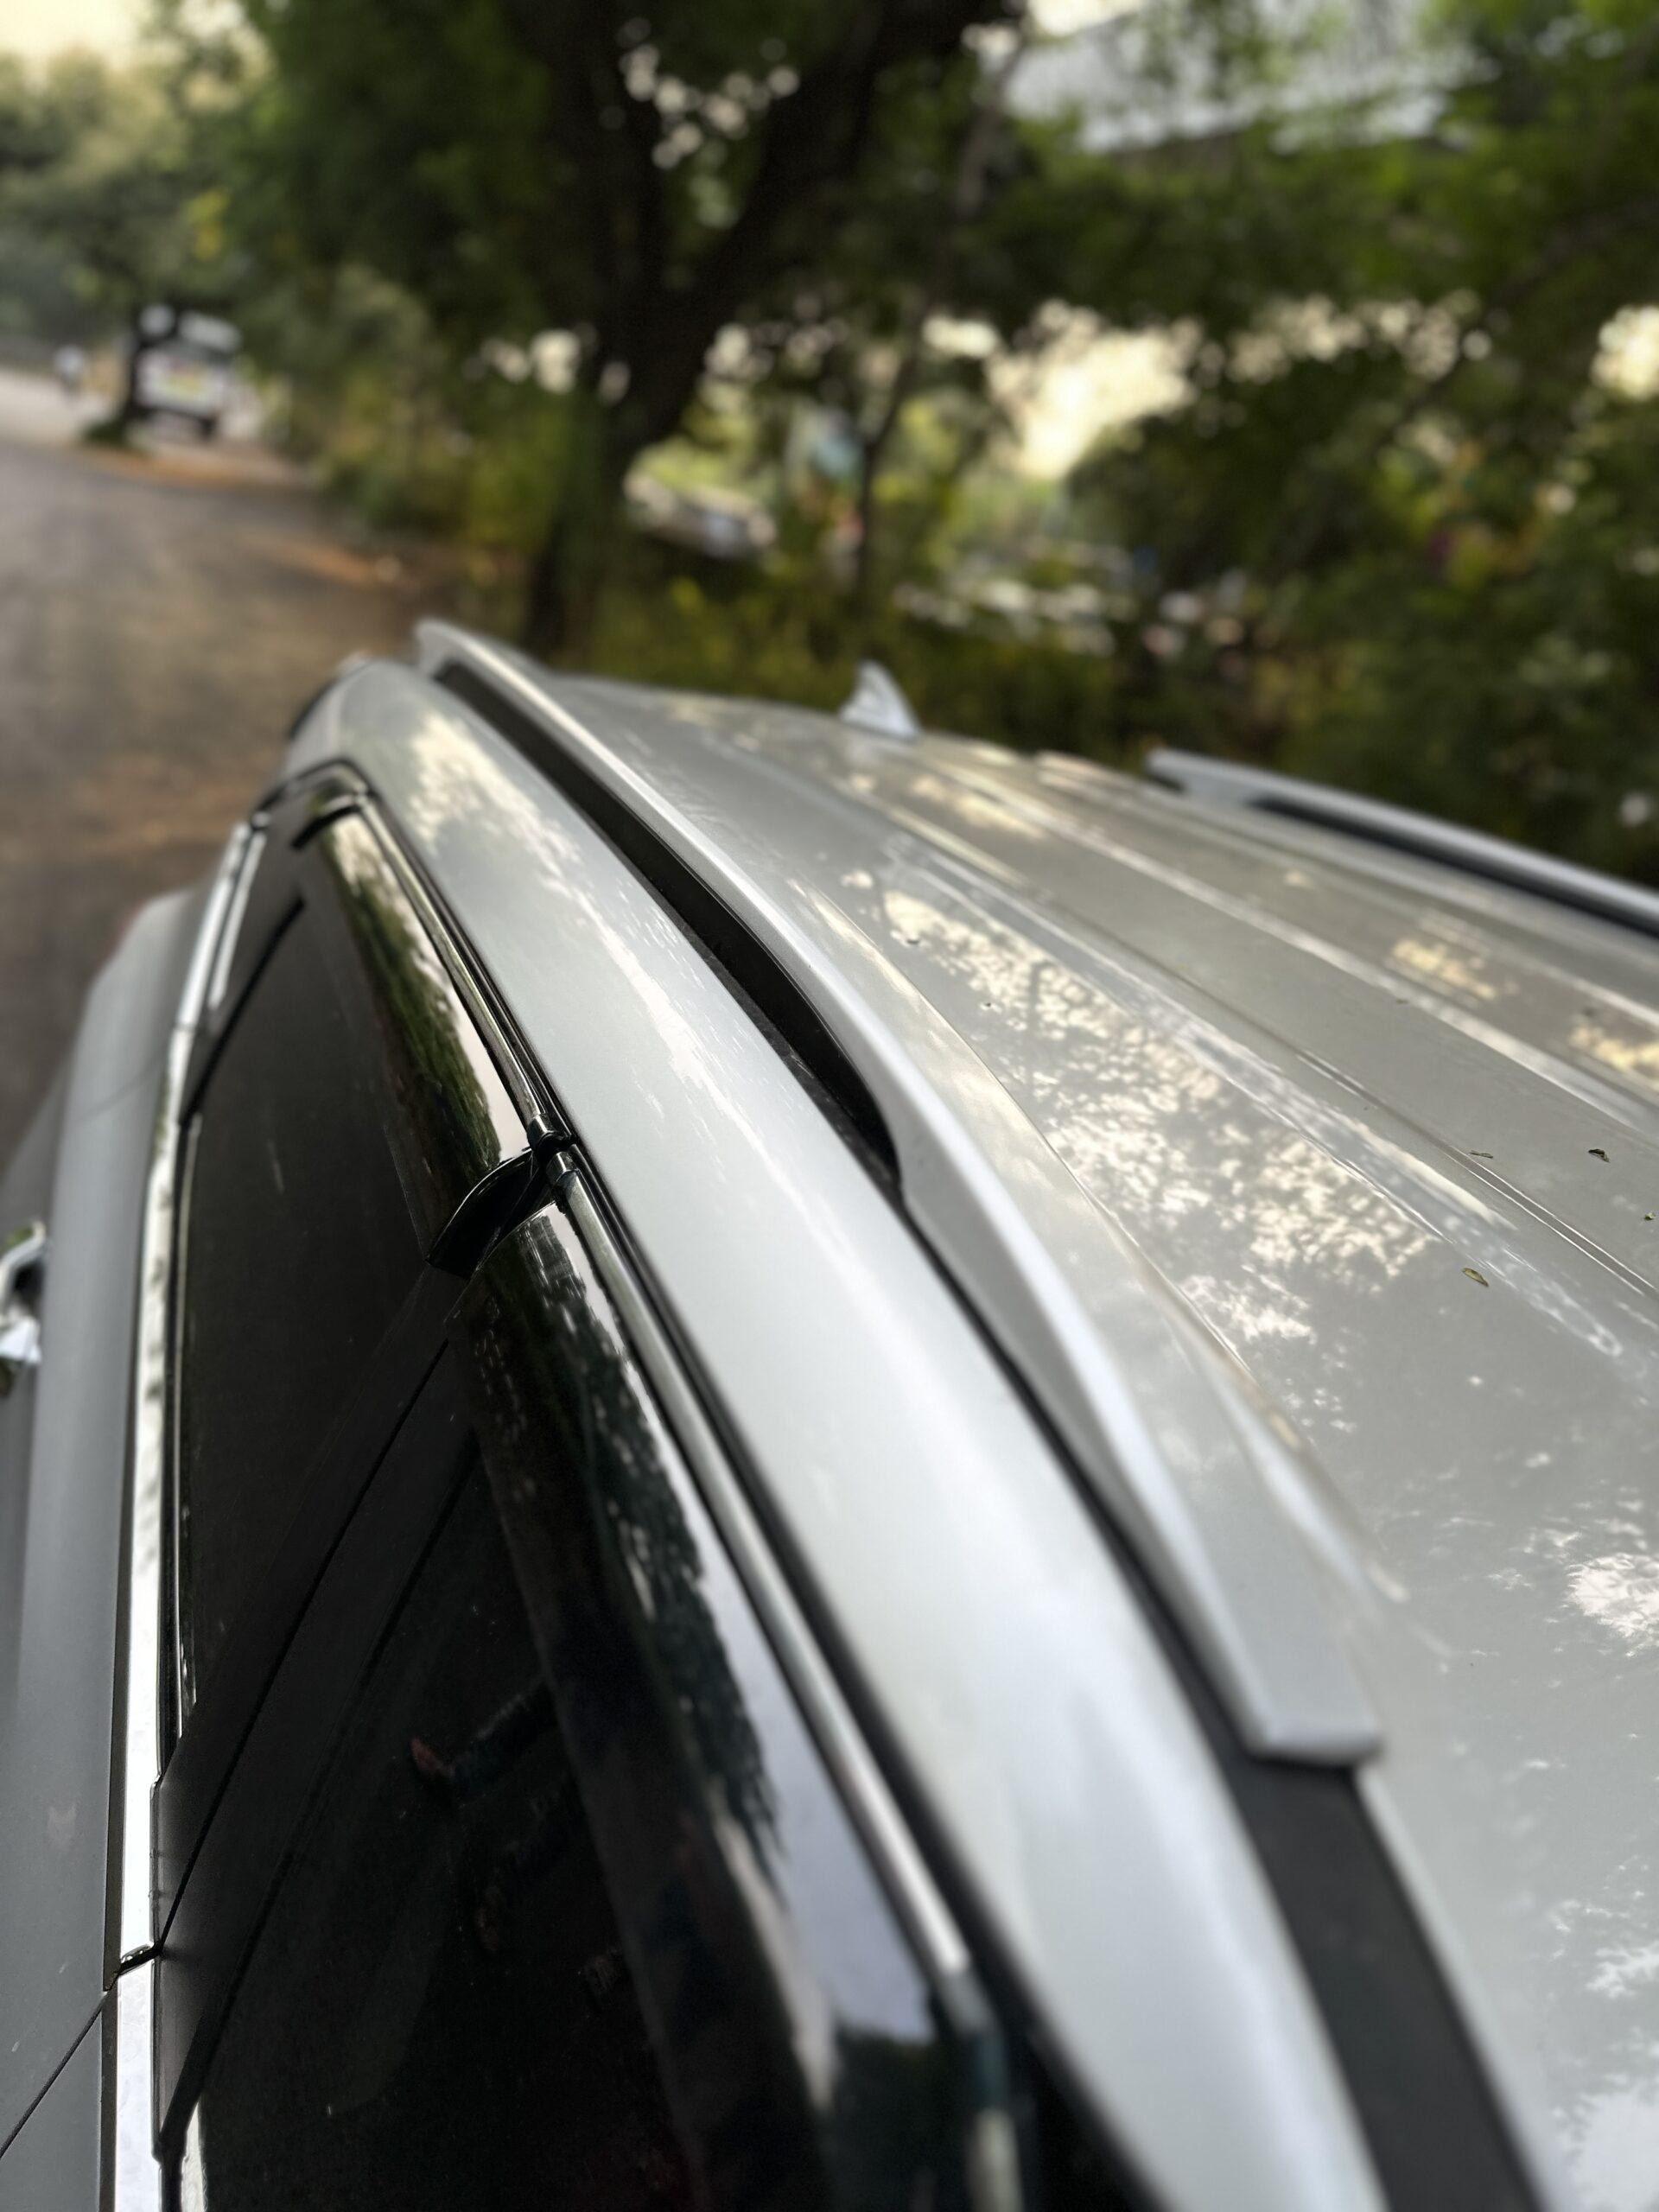 High-Quality Aftermarket Rear Back Spoiler for Mahindra XUV300